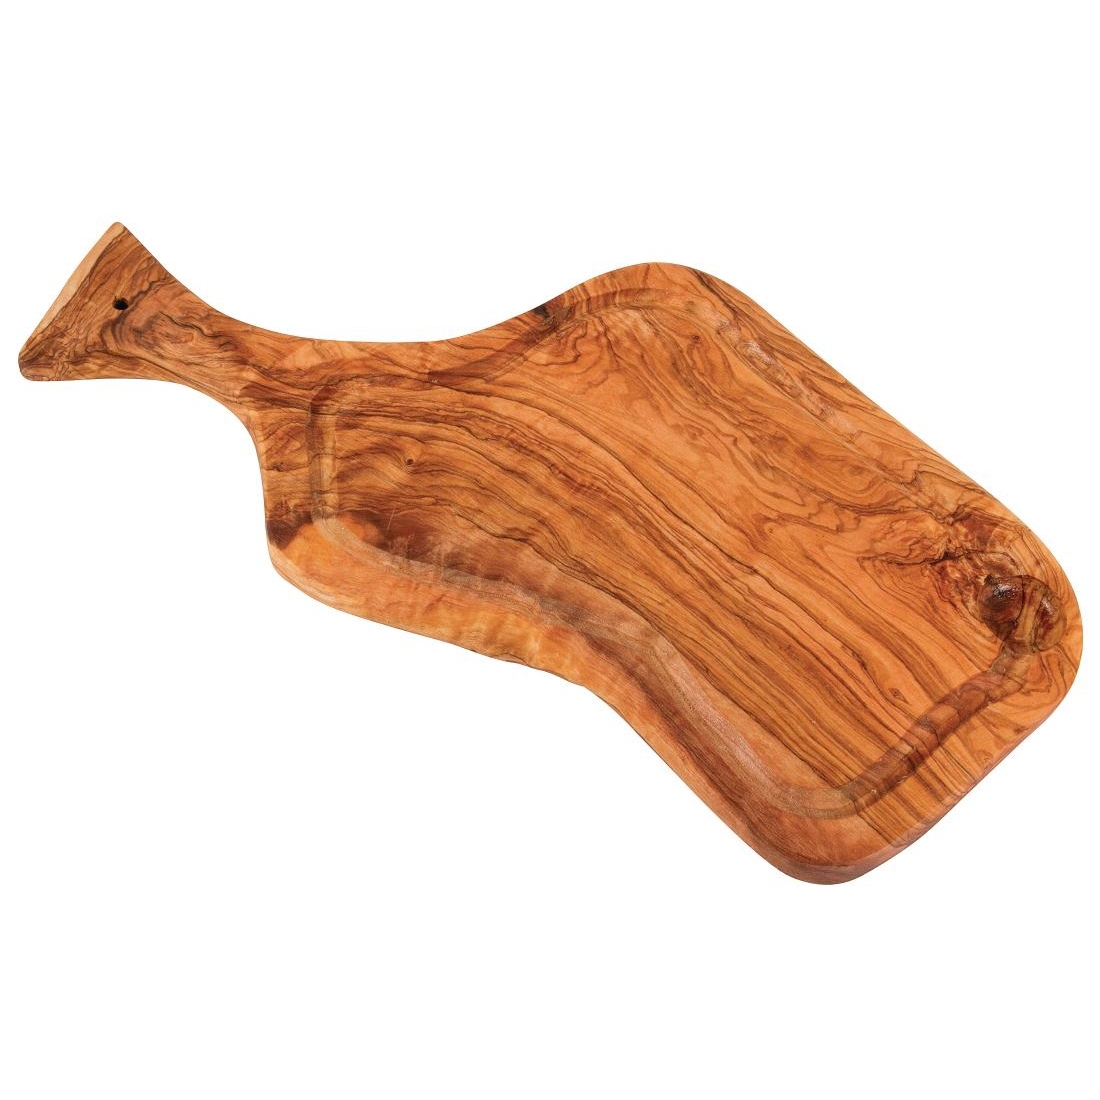 Small Olive Wood Board with Handle